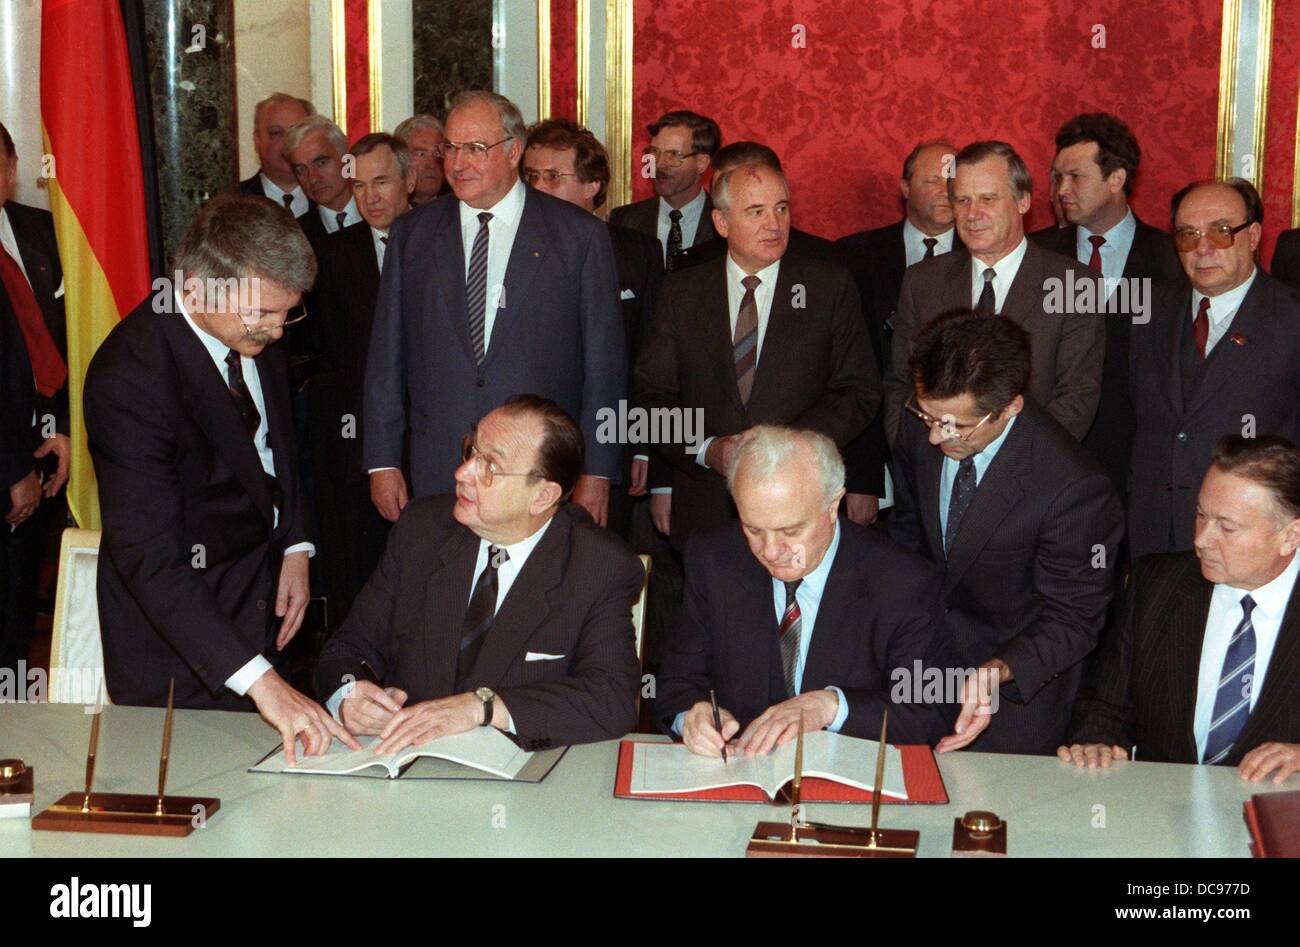 German foreign minister Hans-Dietrich Genscher (M, left) and his Soviet colleague Eduard Shevardnadze (M, right) sign a treaty about a German credit in Moscow. Behind Genscher is Helmut Kohl, behind Shevardnaze is Soviet president Mikhail Gorbachev. The German delegation stayed in the Soviet Union for a state visit from the 24th to the 27th of October in 1988. Stock Photo